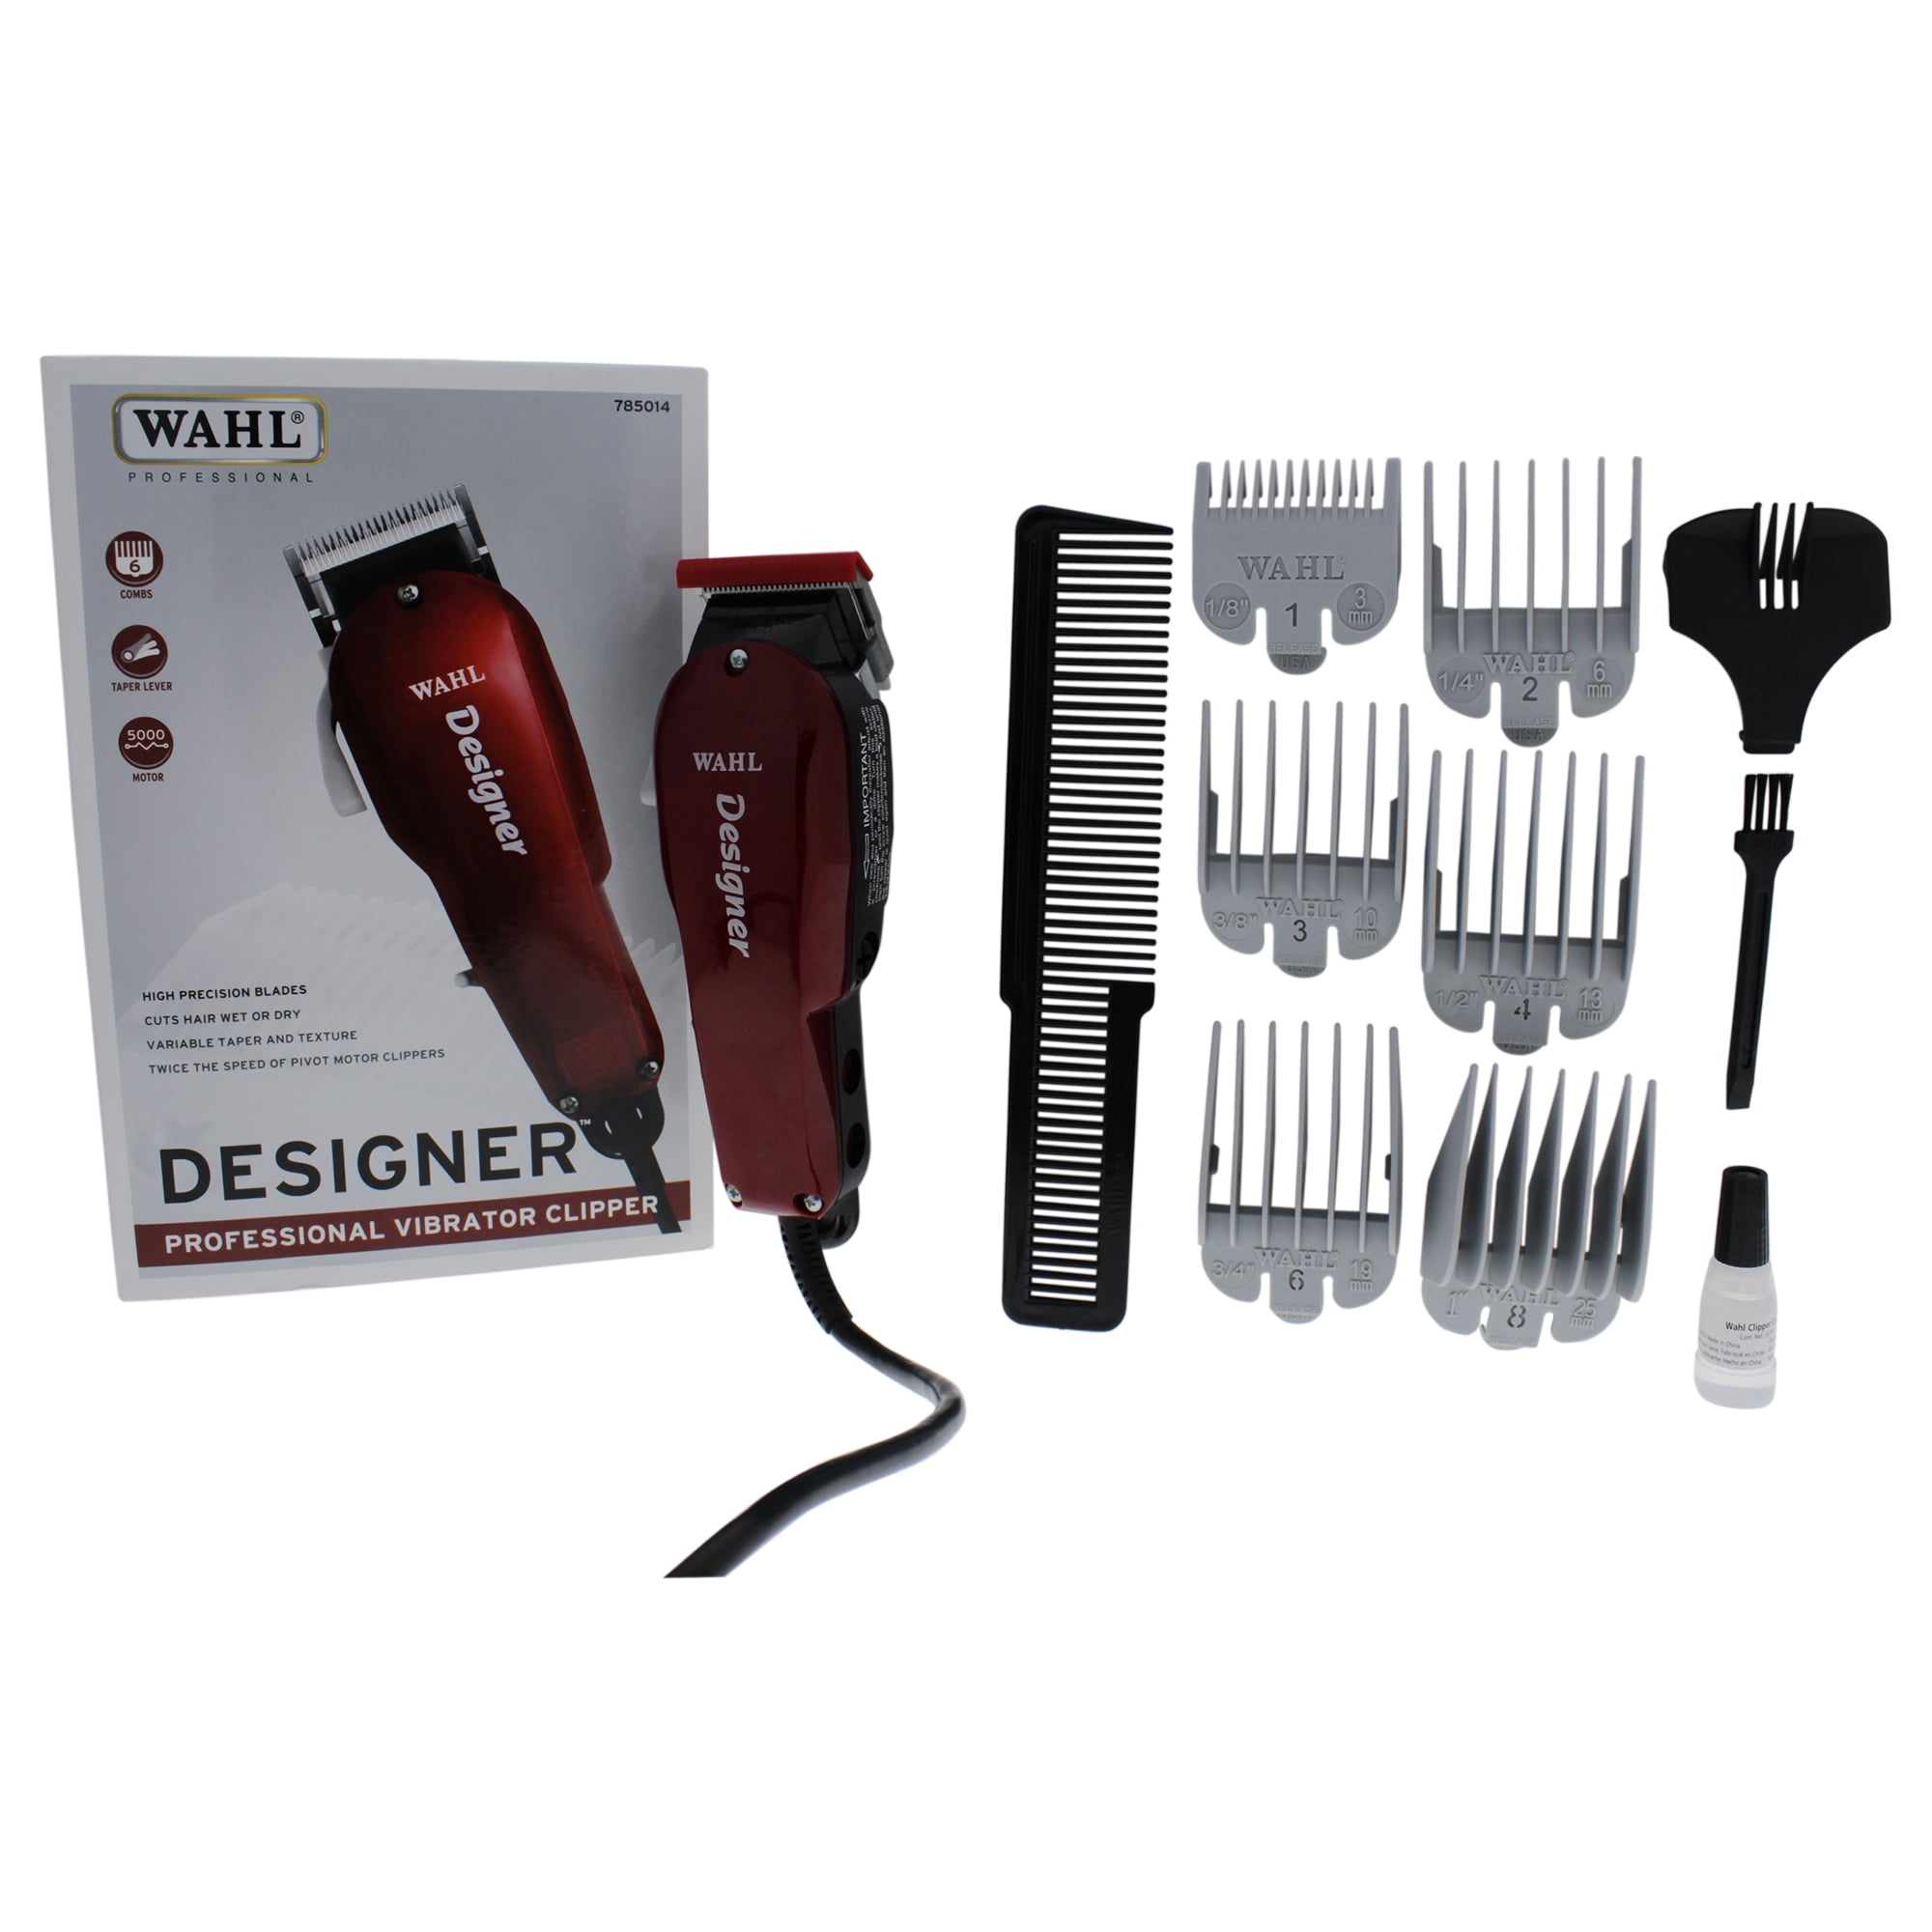 Wahl professional trimmer canada